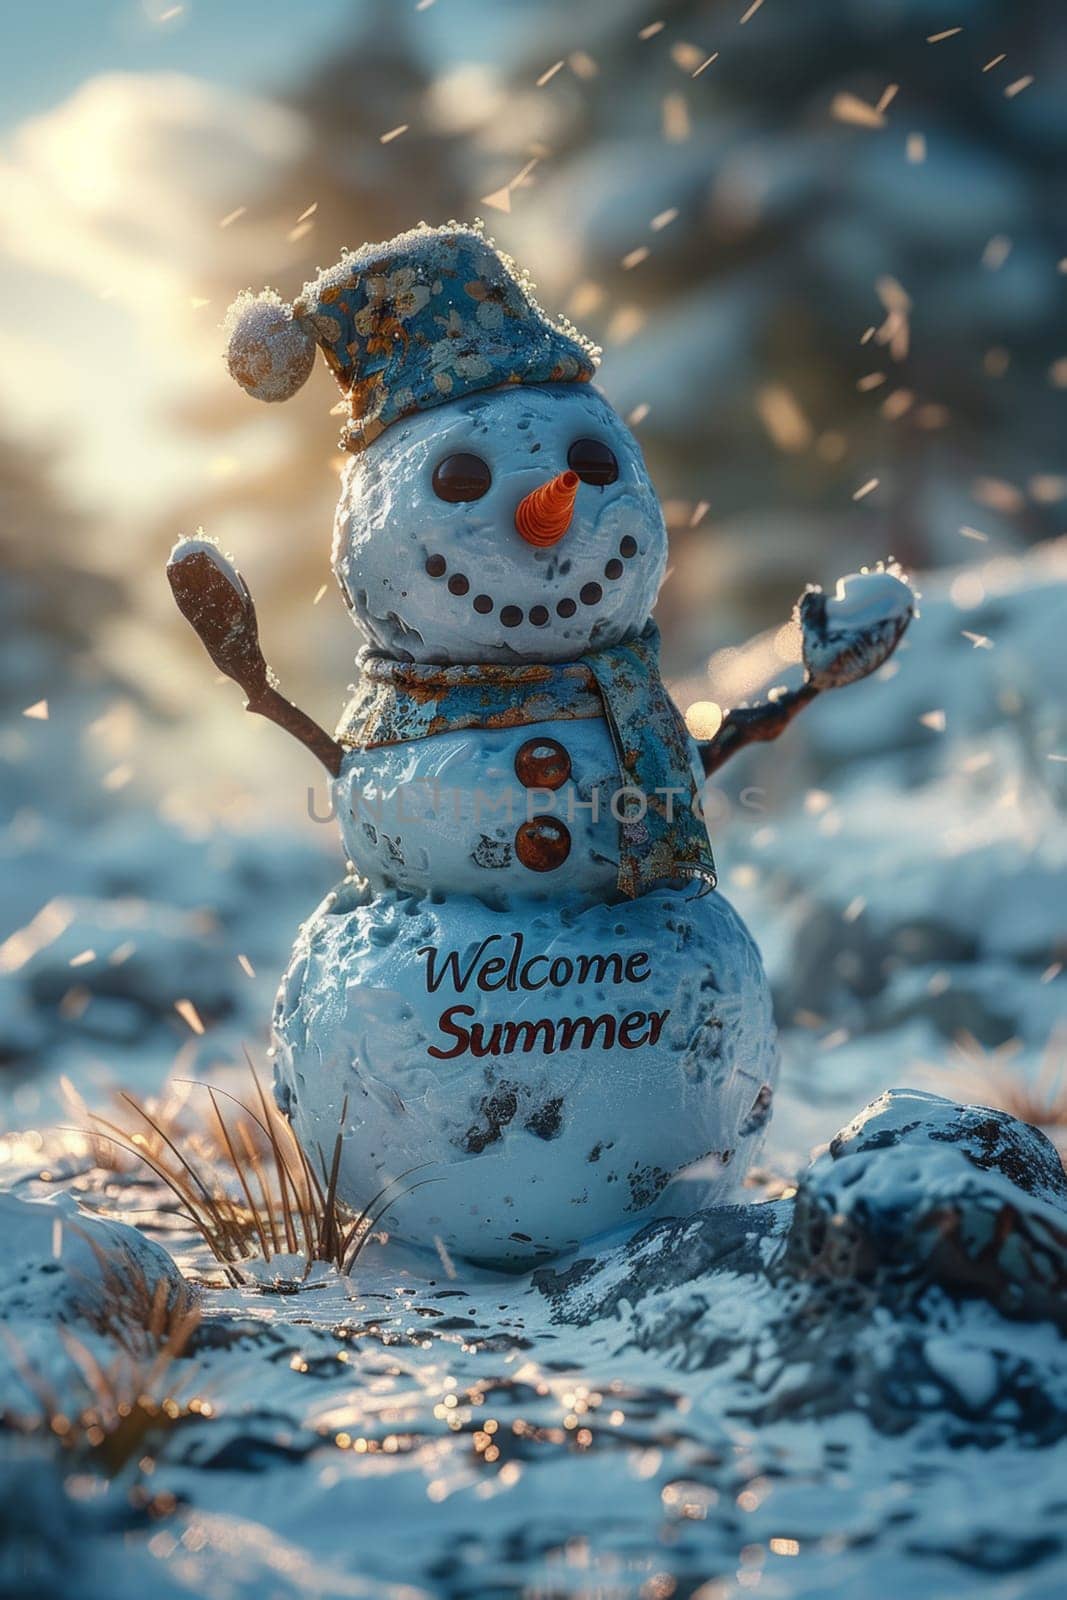 Funny little snowman in nature with the inscription Welcome summer on it.